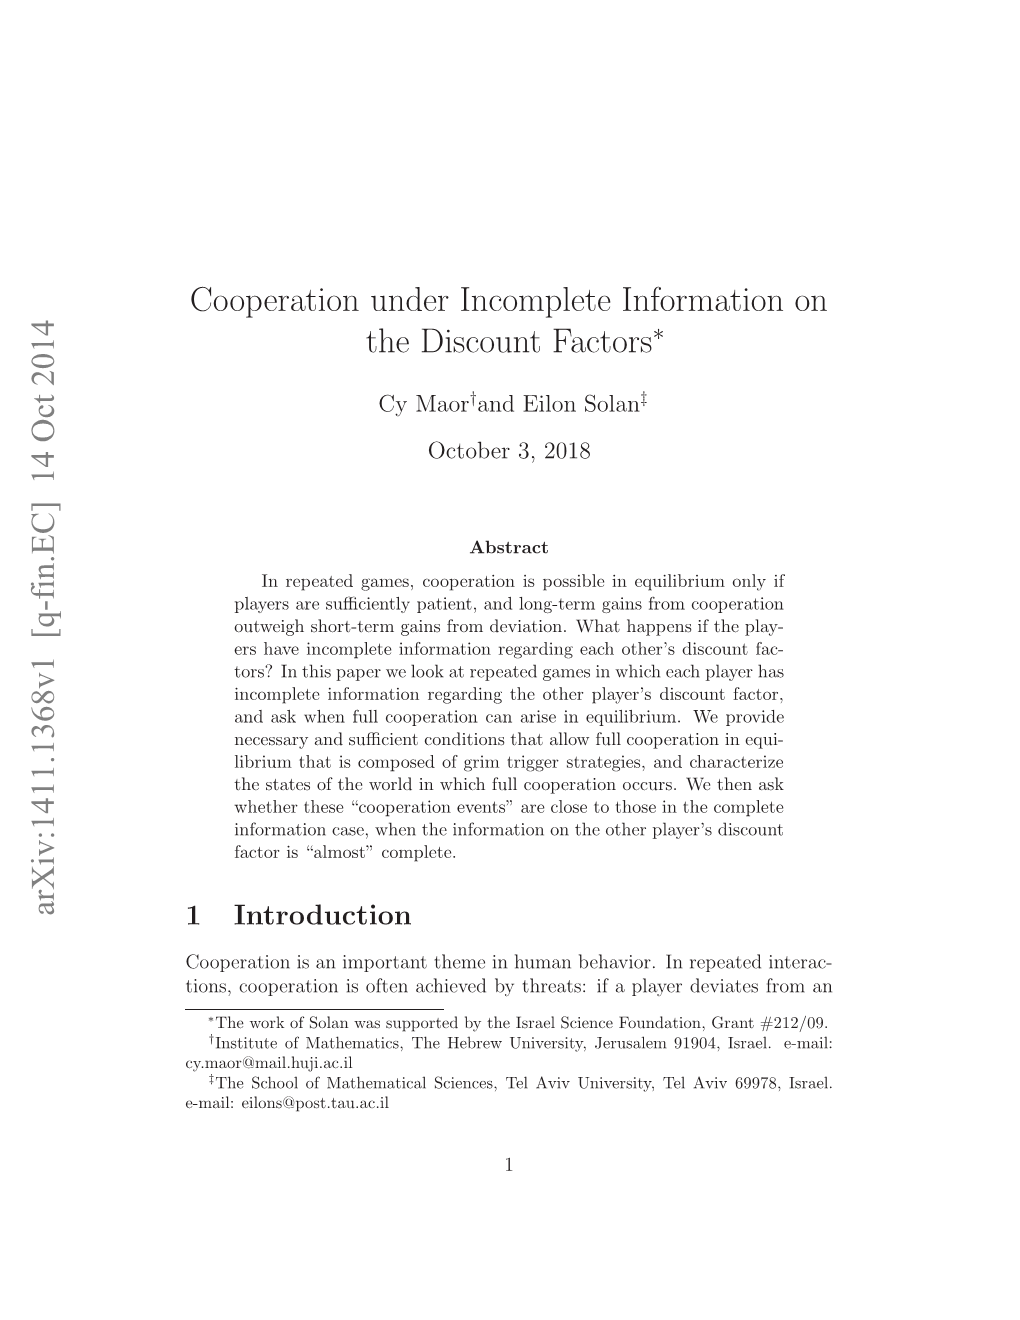 Cooperation Under Incomplete Information on the Discount Factors, M.Sc